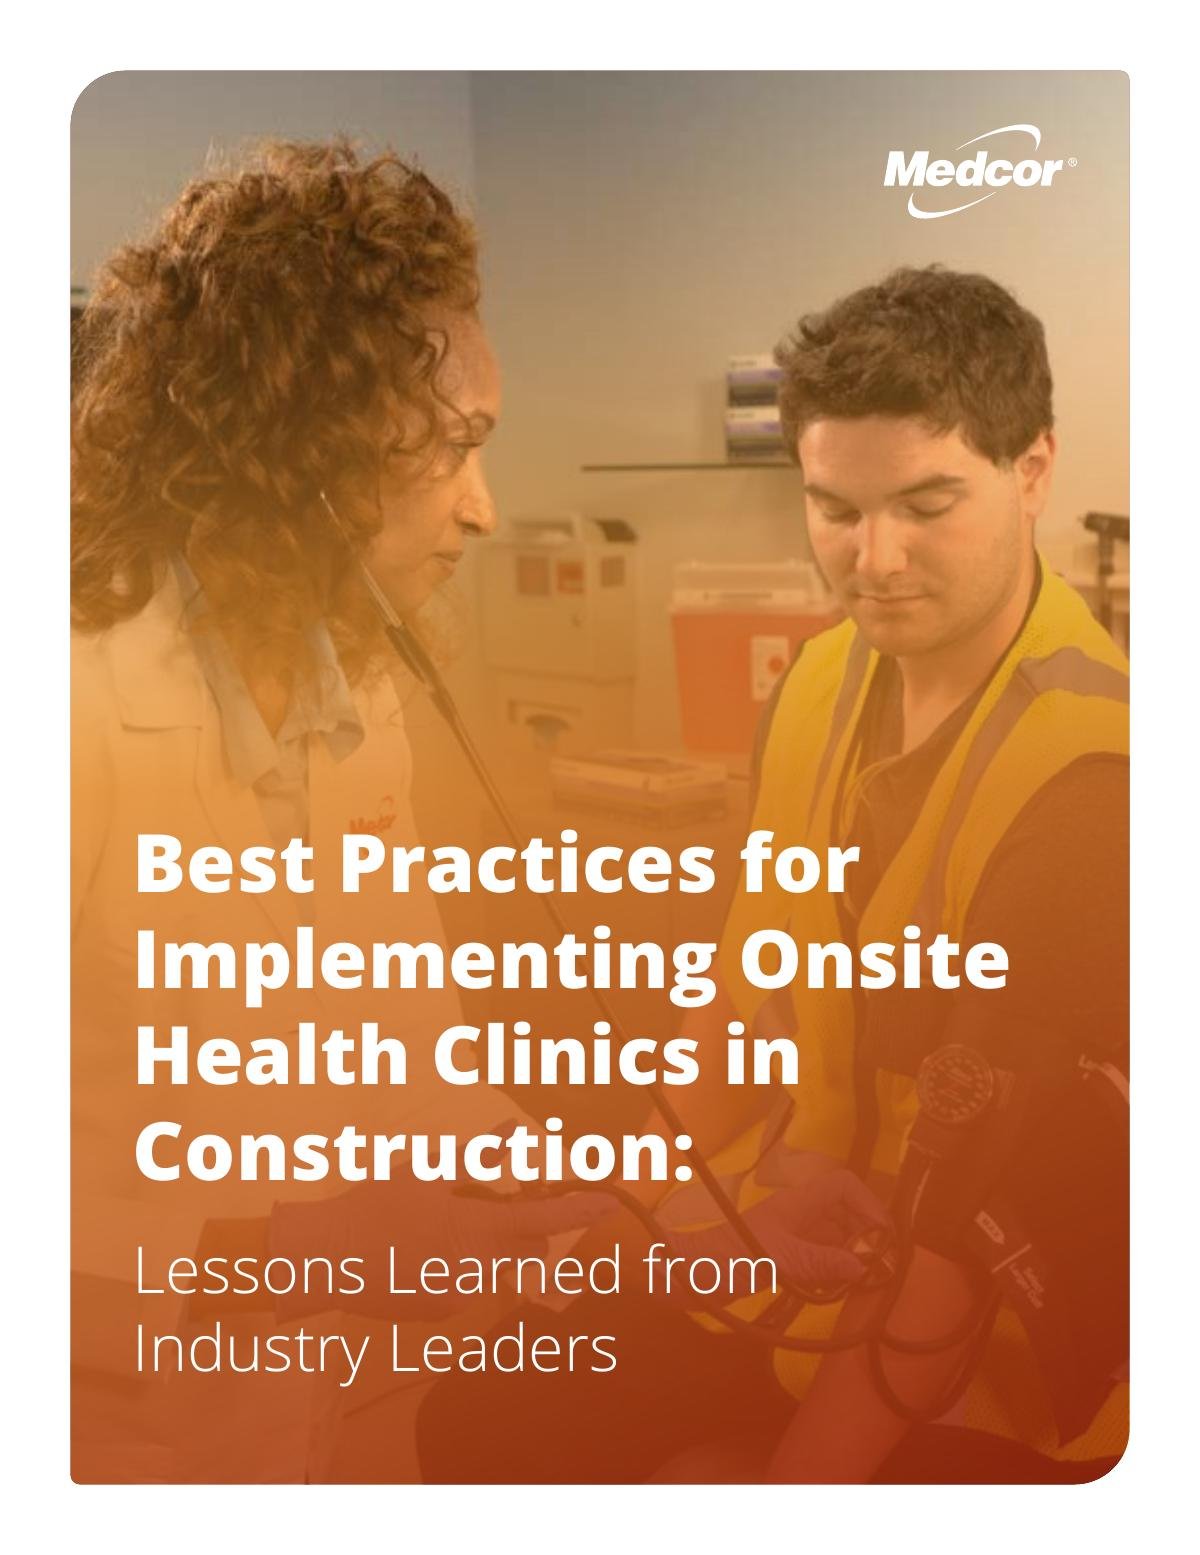 Best Practices for Implementing Onsite Clinics in Construction